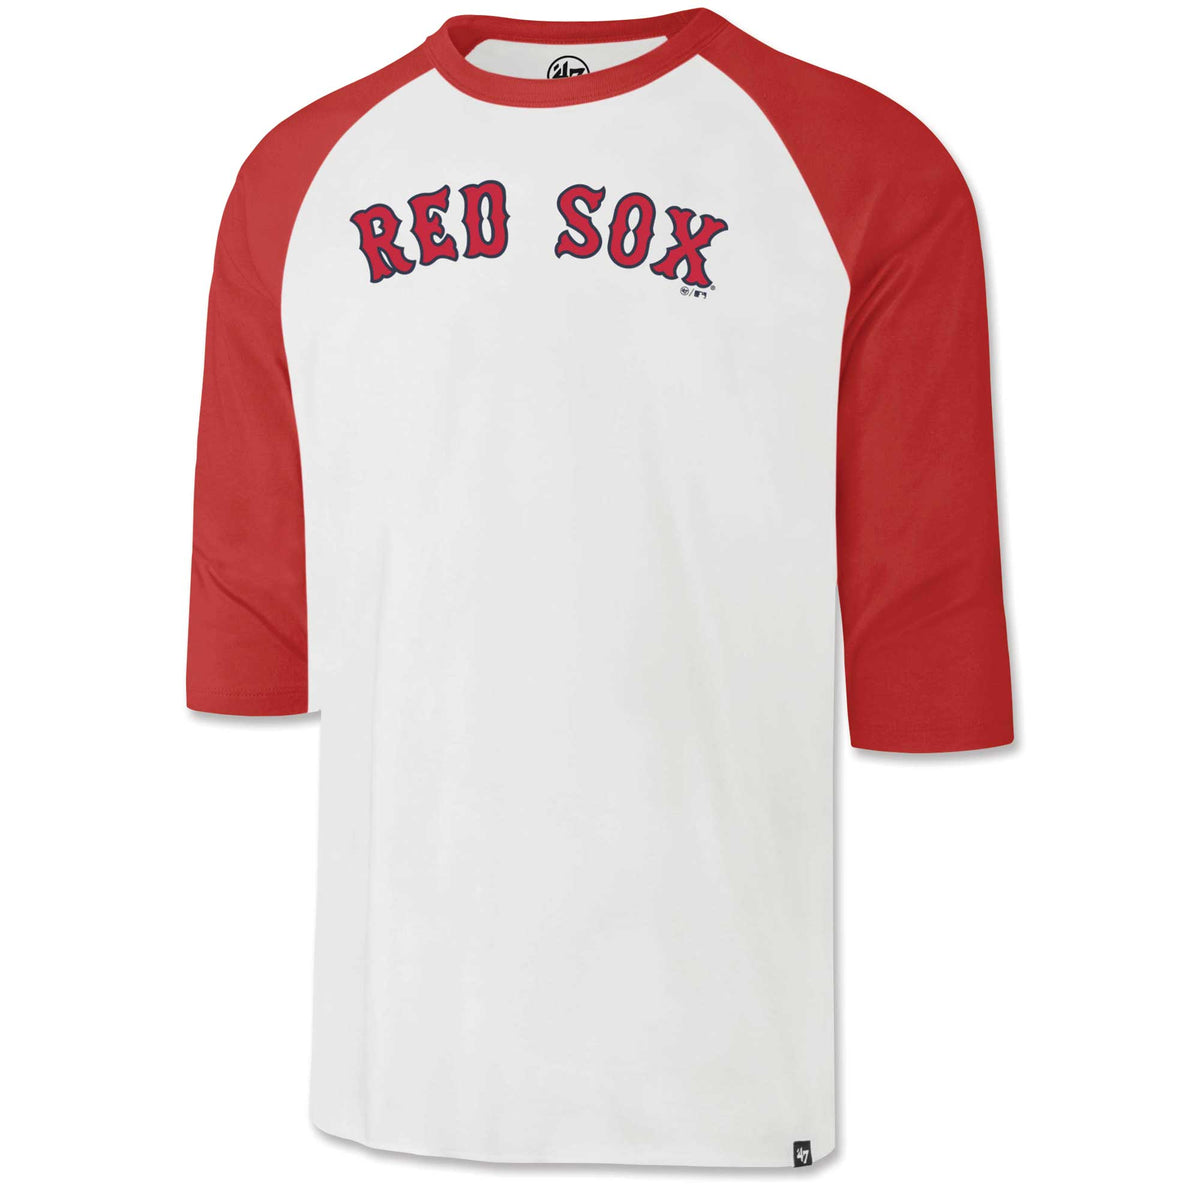 red sox red shirt